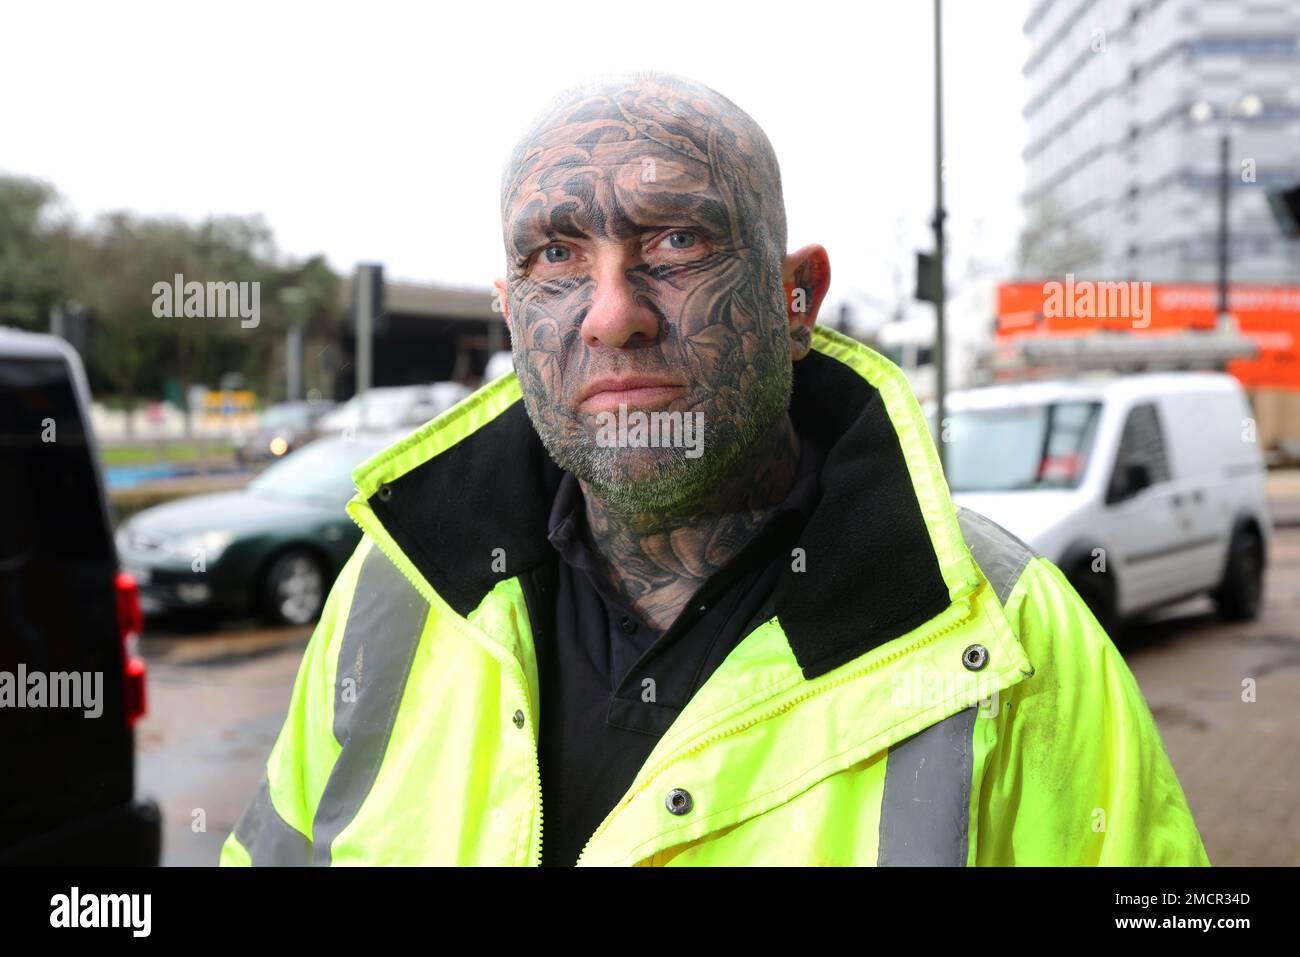 A man with full face tattoos pictured in Sunbury, London, UK. Stock Photo